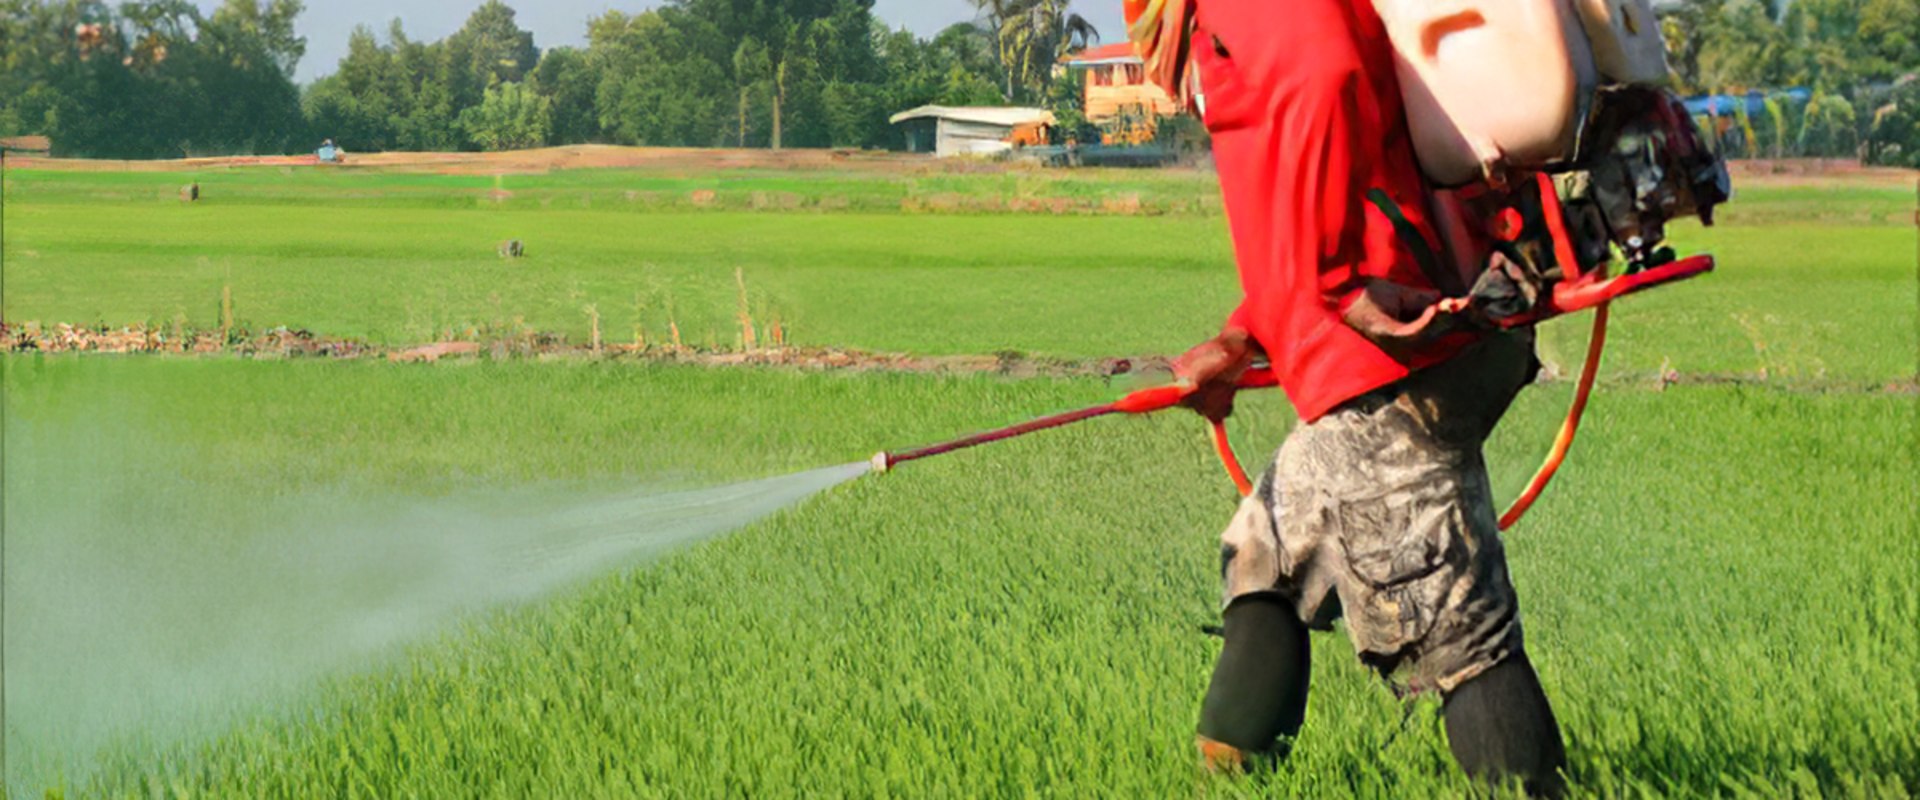 What kind of poisoning can be caused by pesticides?